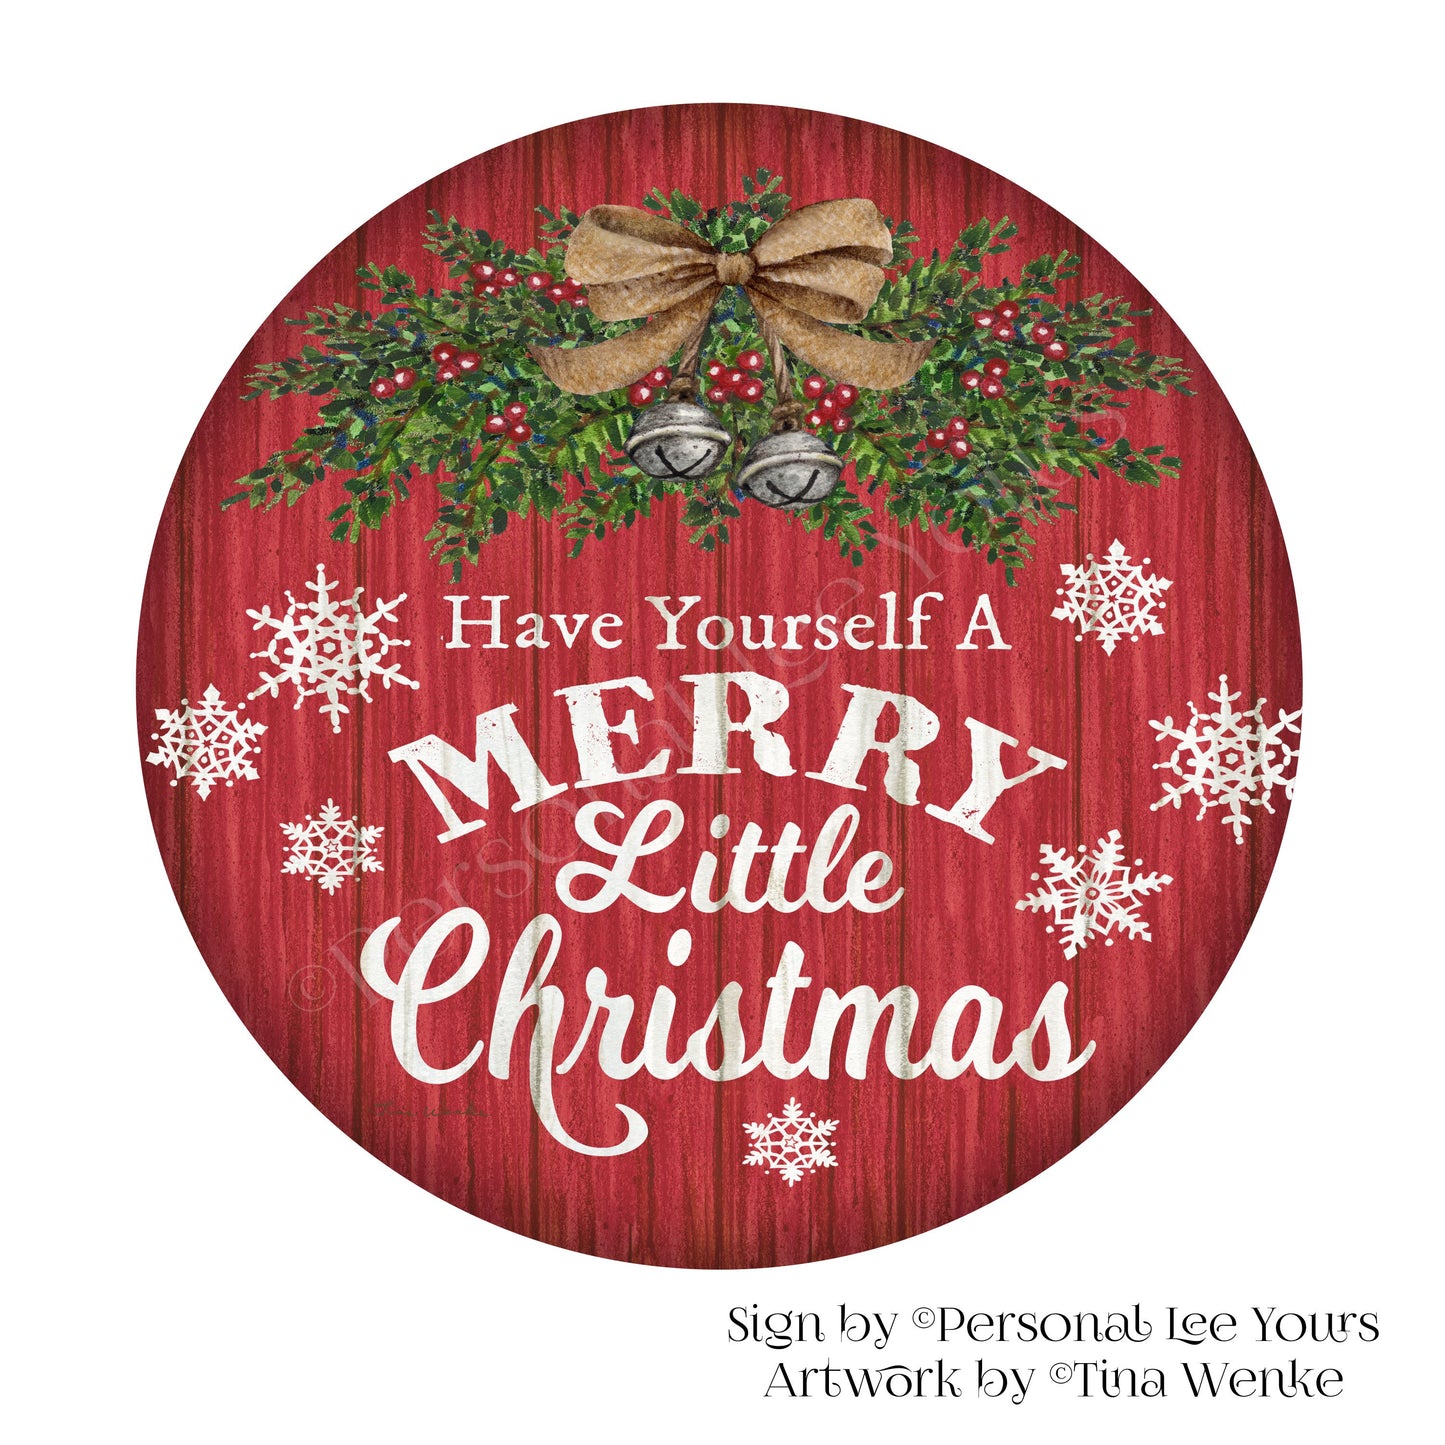 Tina Wenke Exclusive Sign * Merry Little Christmas * Round * Lightweight Metal